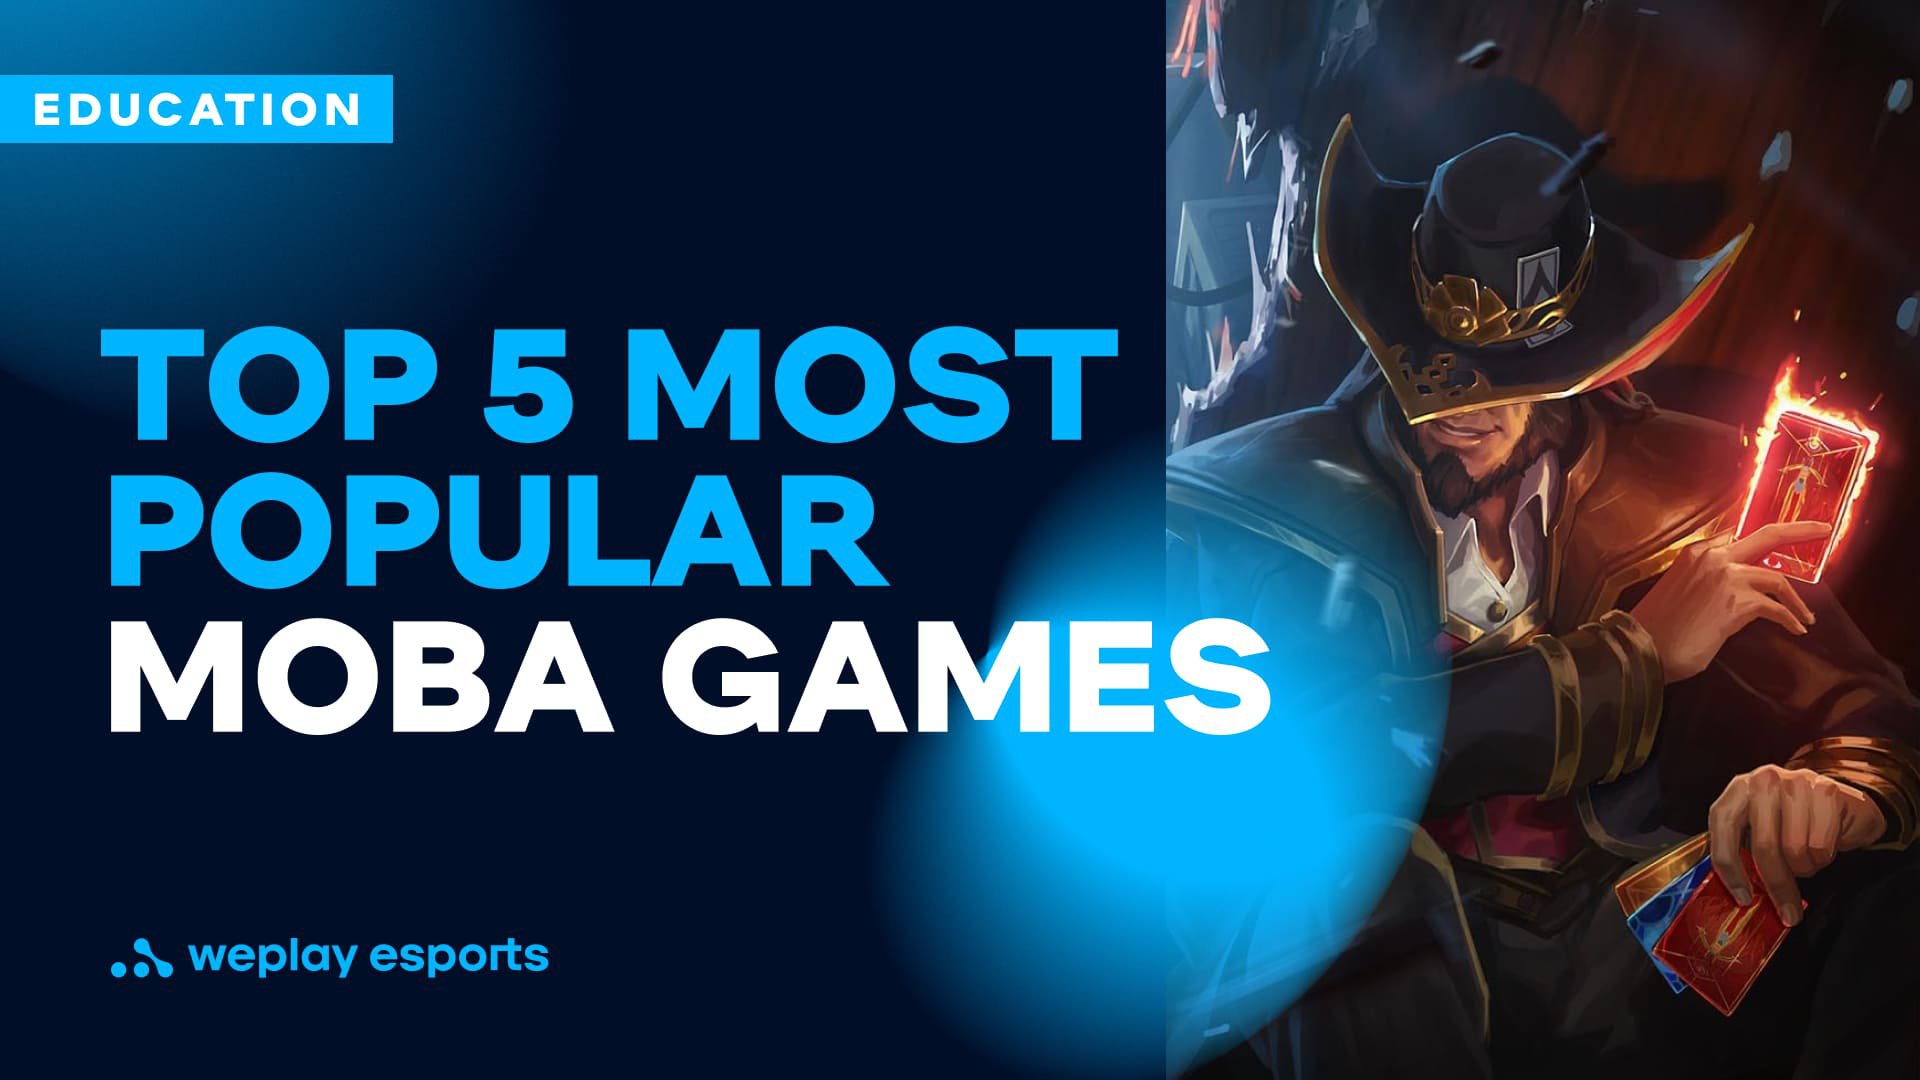 Top 5 most popular MOBA games. Credit: WePlay Holding